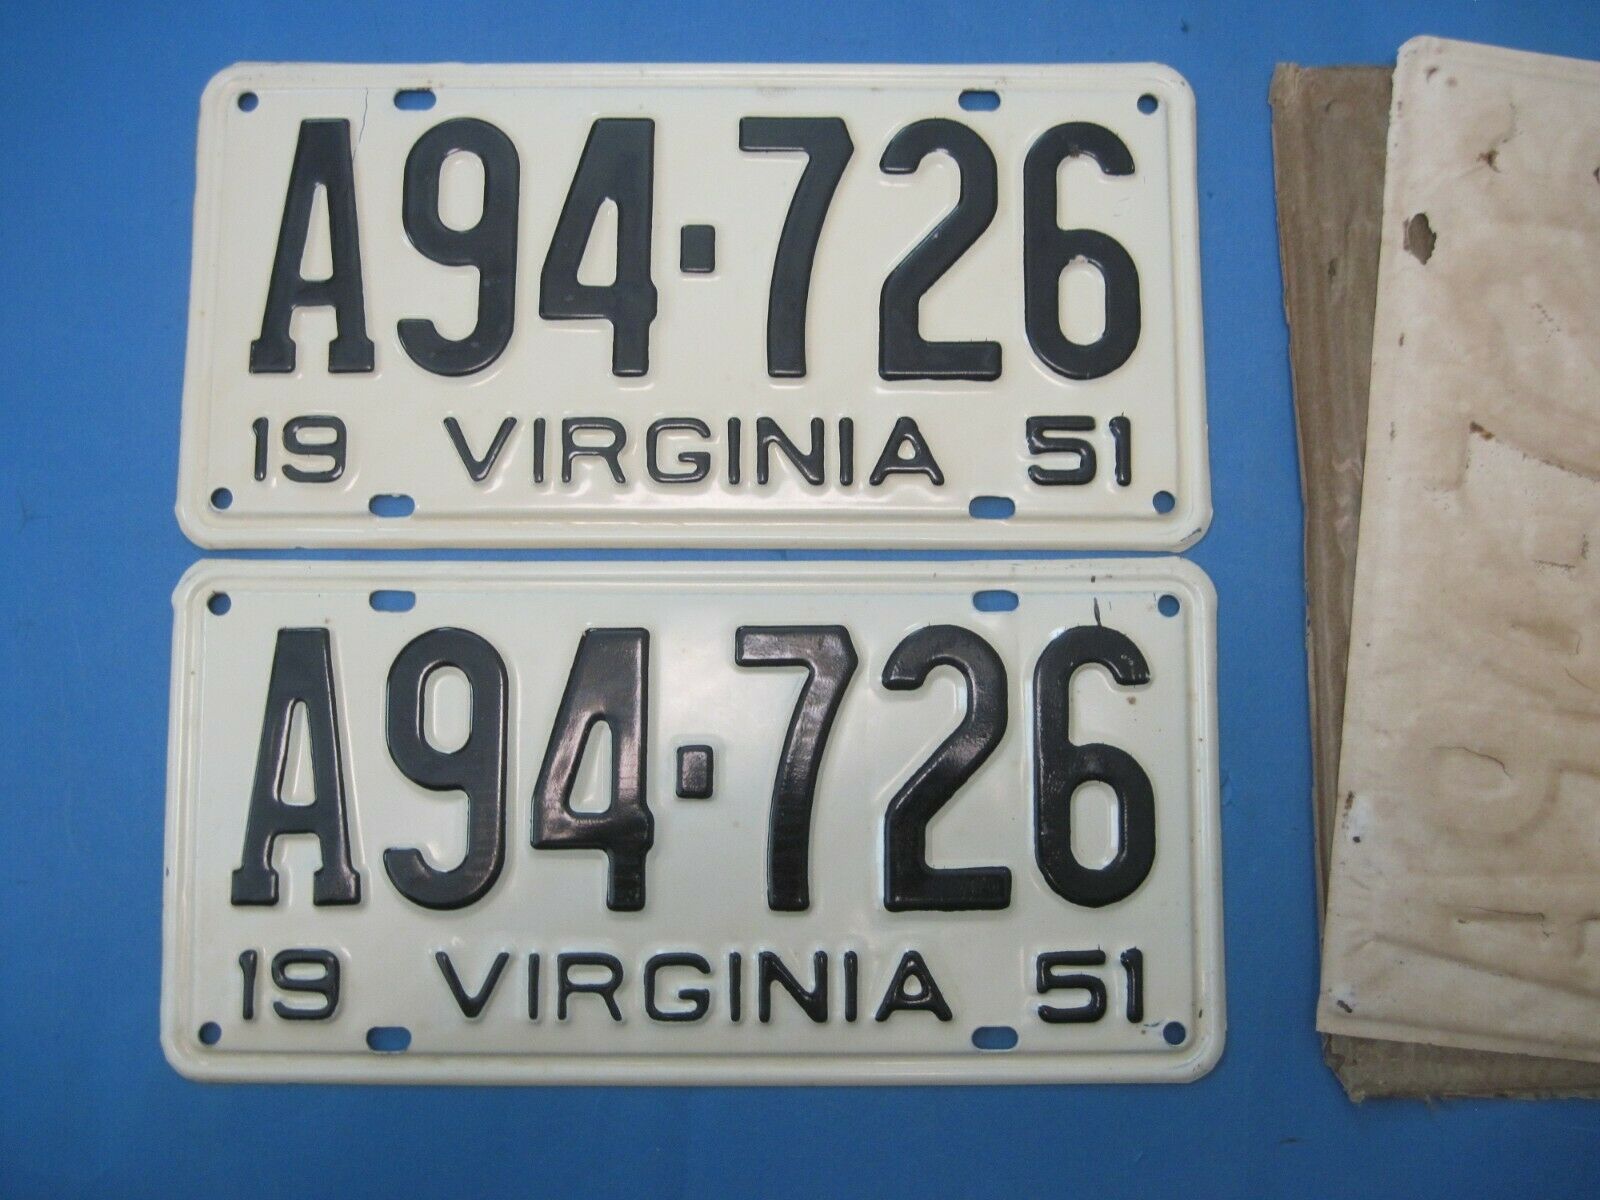 1951 Virginia License Plates Matched Never Used Dmv Clear For Registration